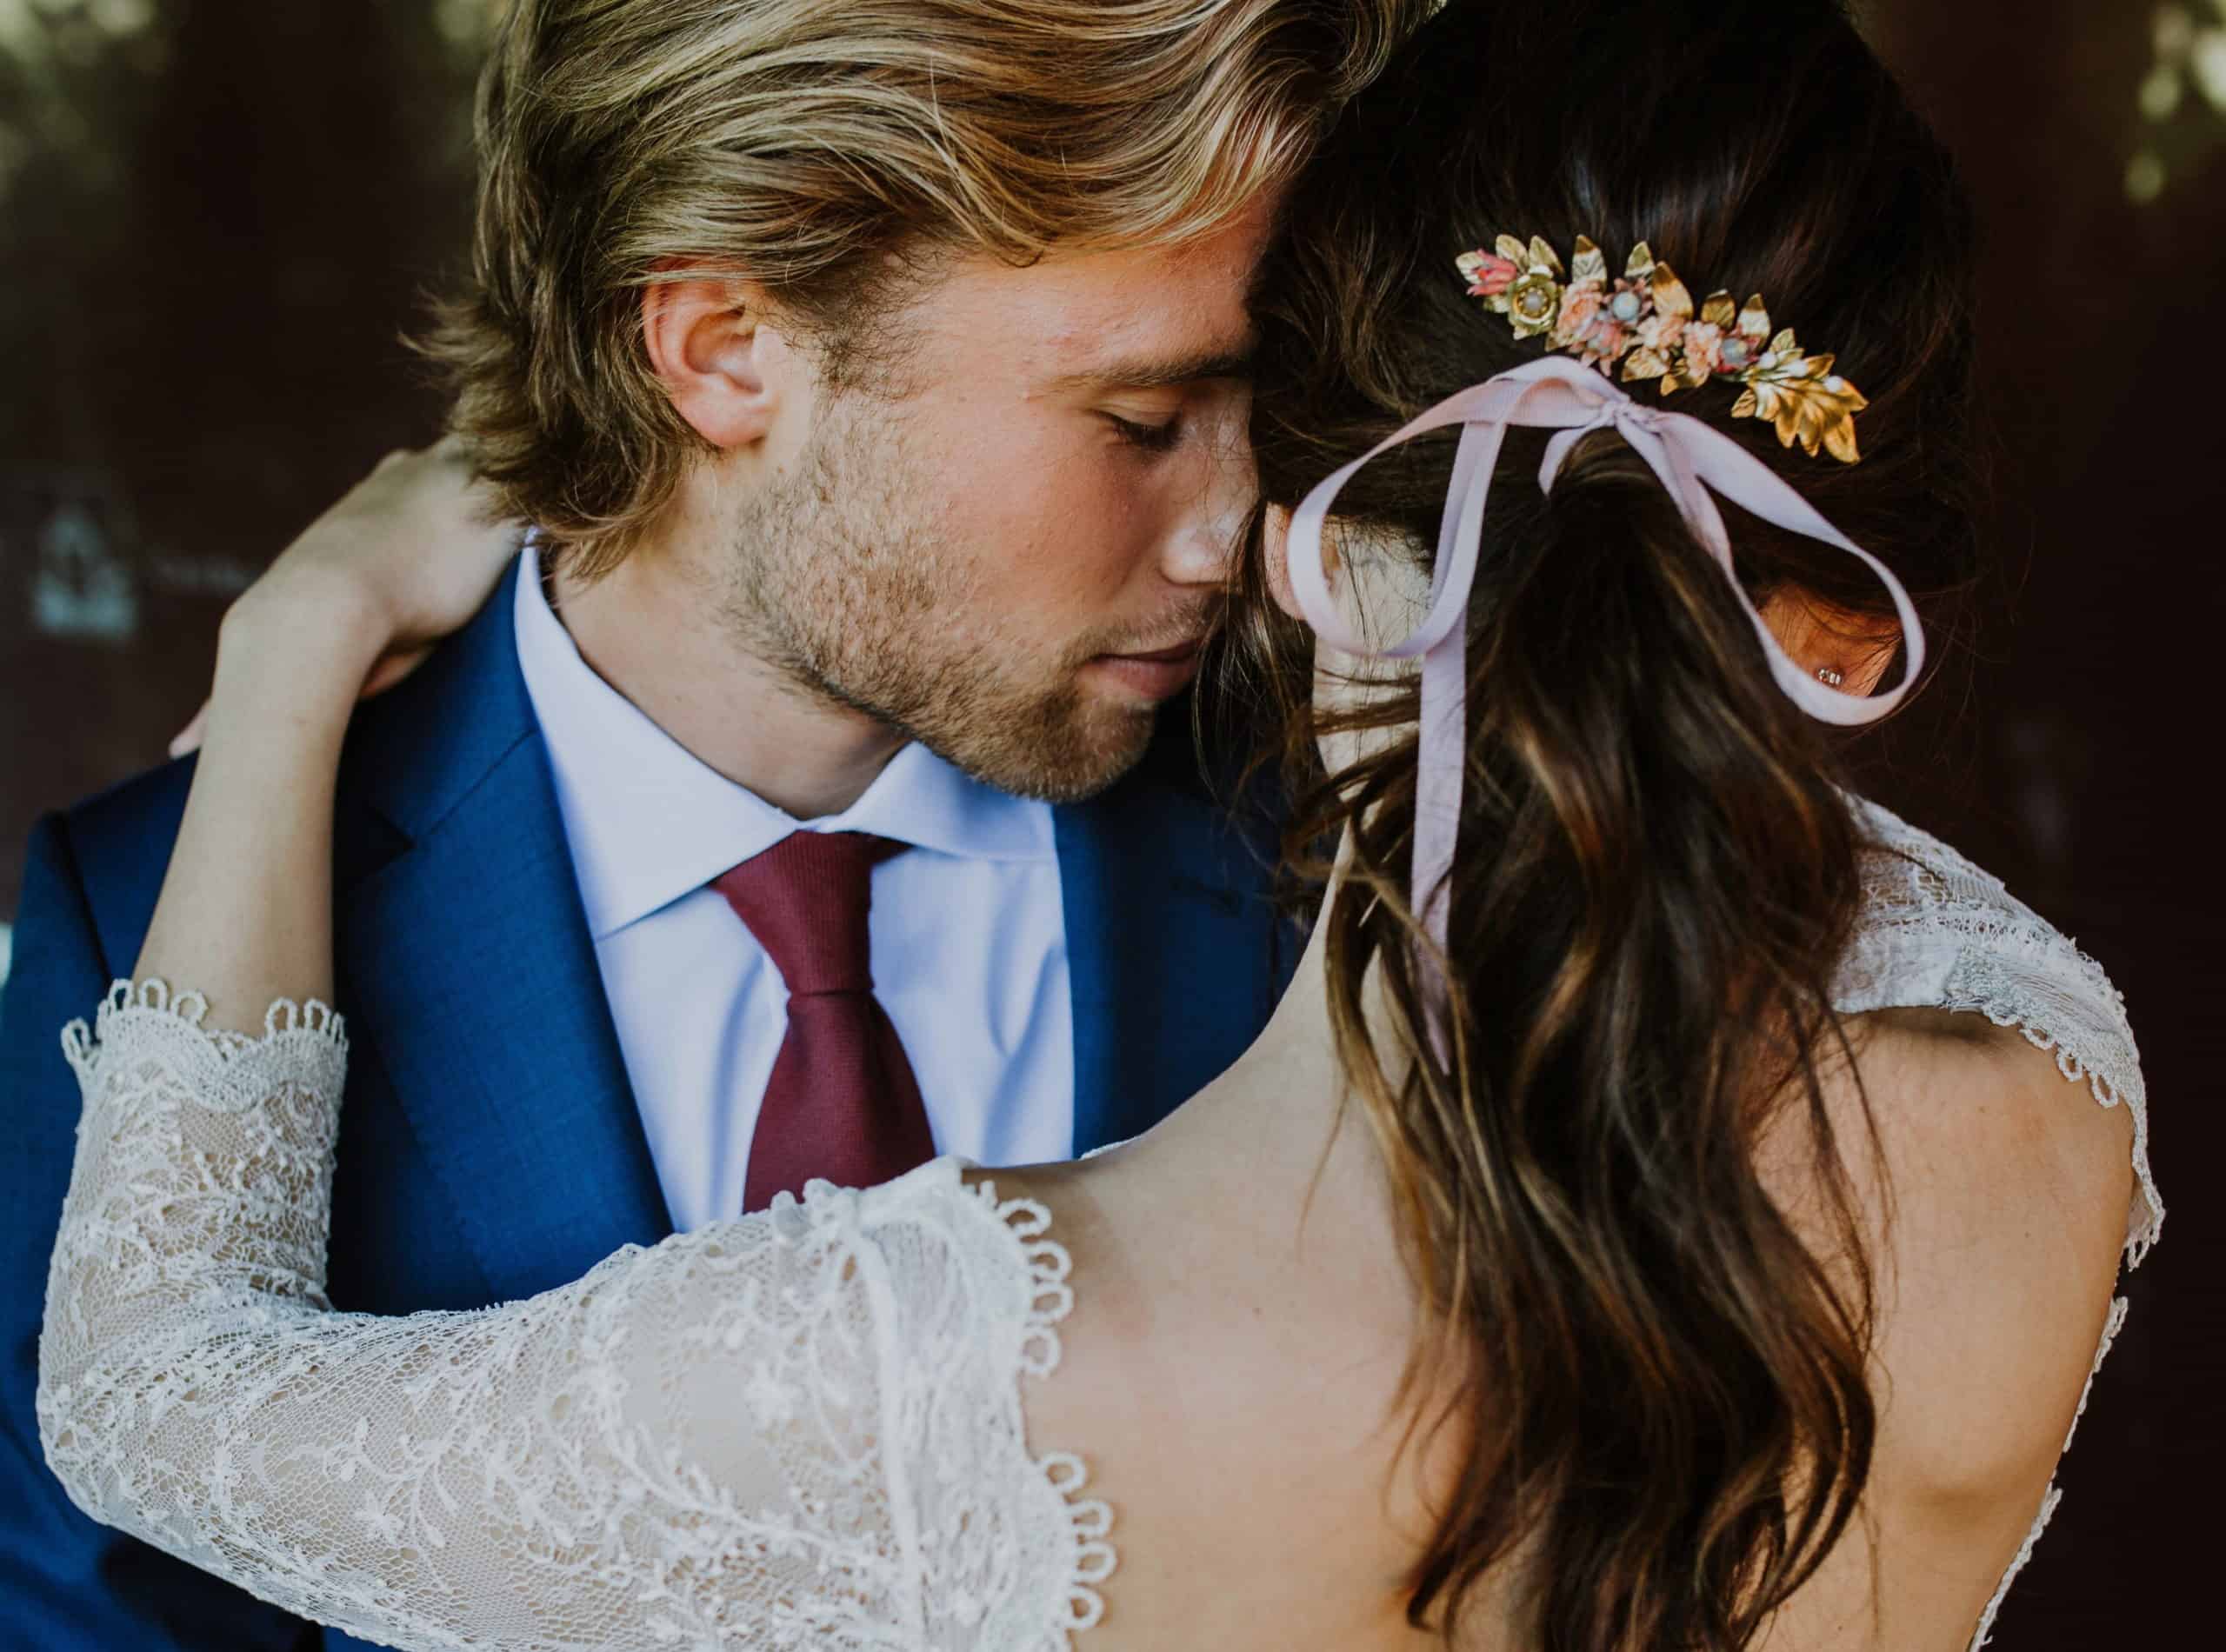 The ribbon is a must-have for this year's wedding hairstyles